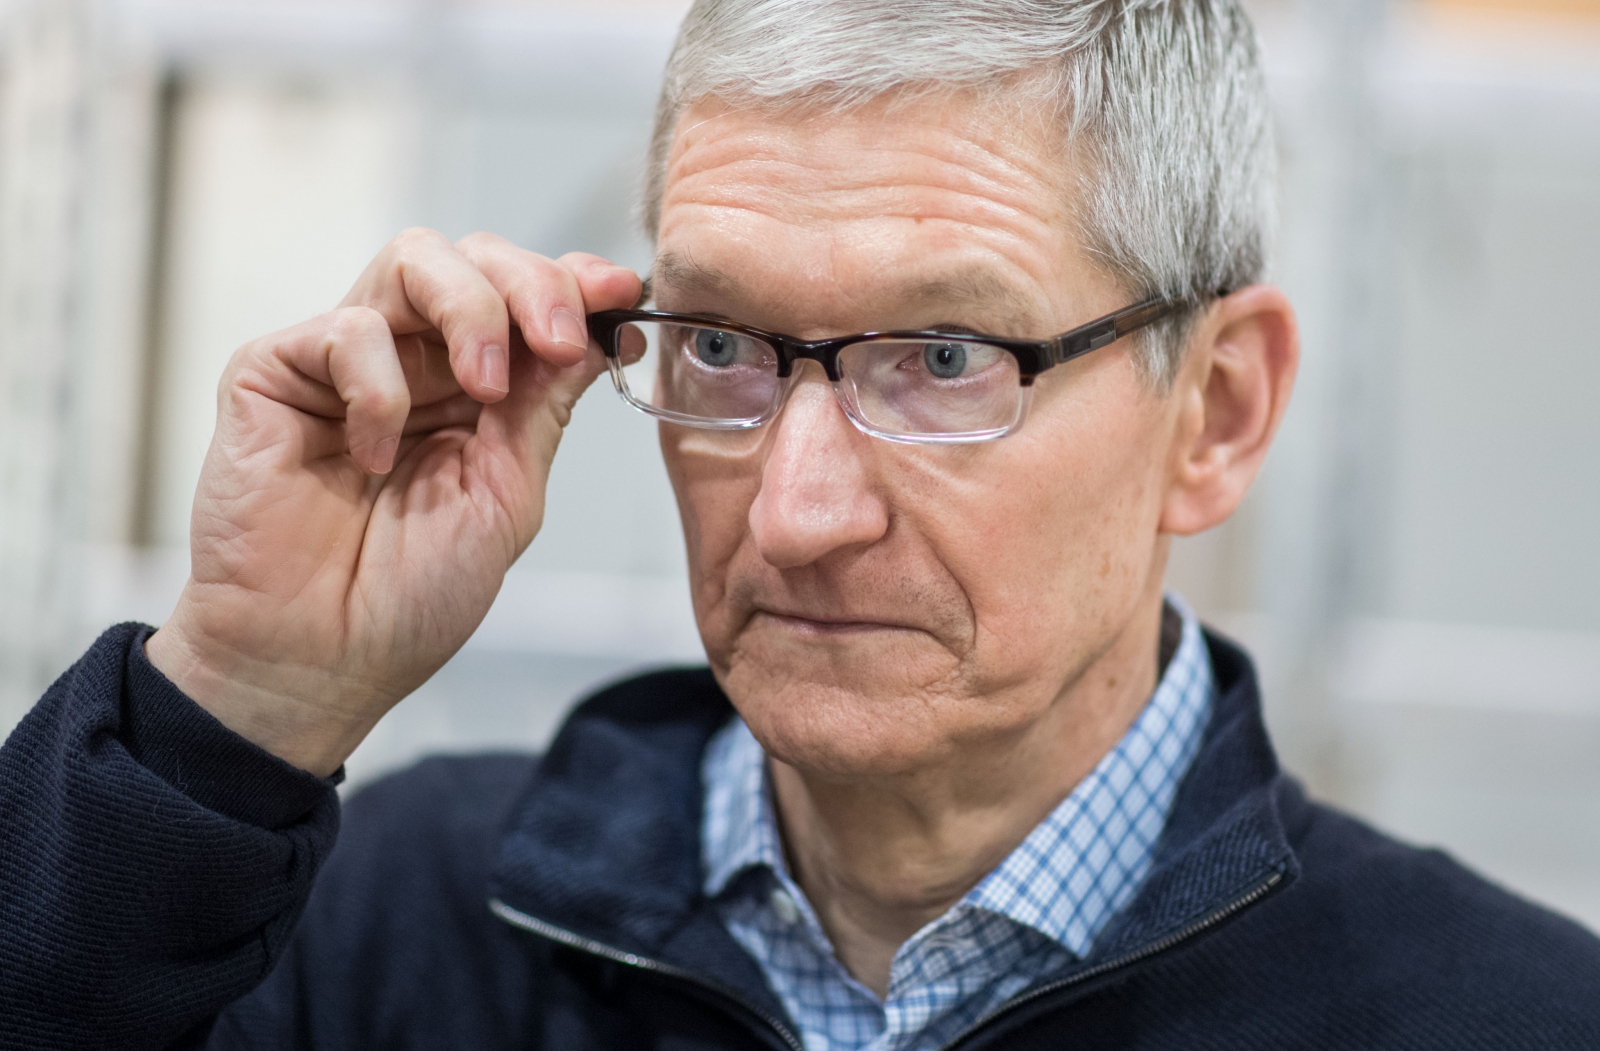 Tim Cook blames escalating iPhone 8 leaks for fall in iPhone sales